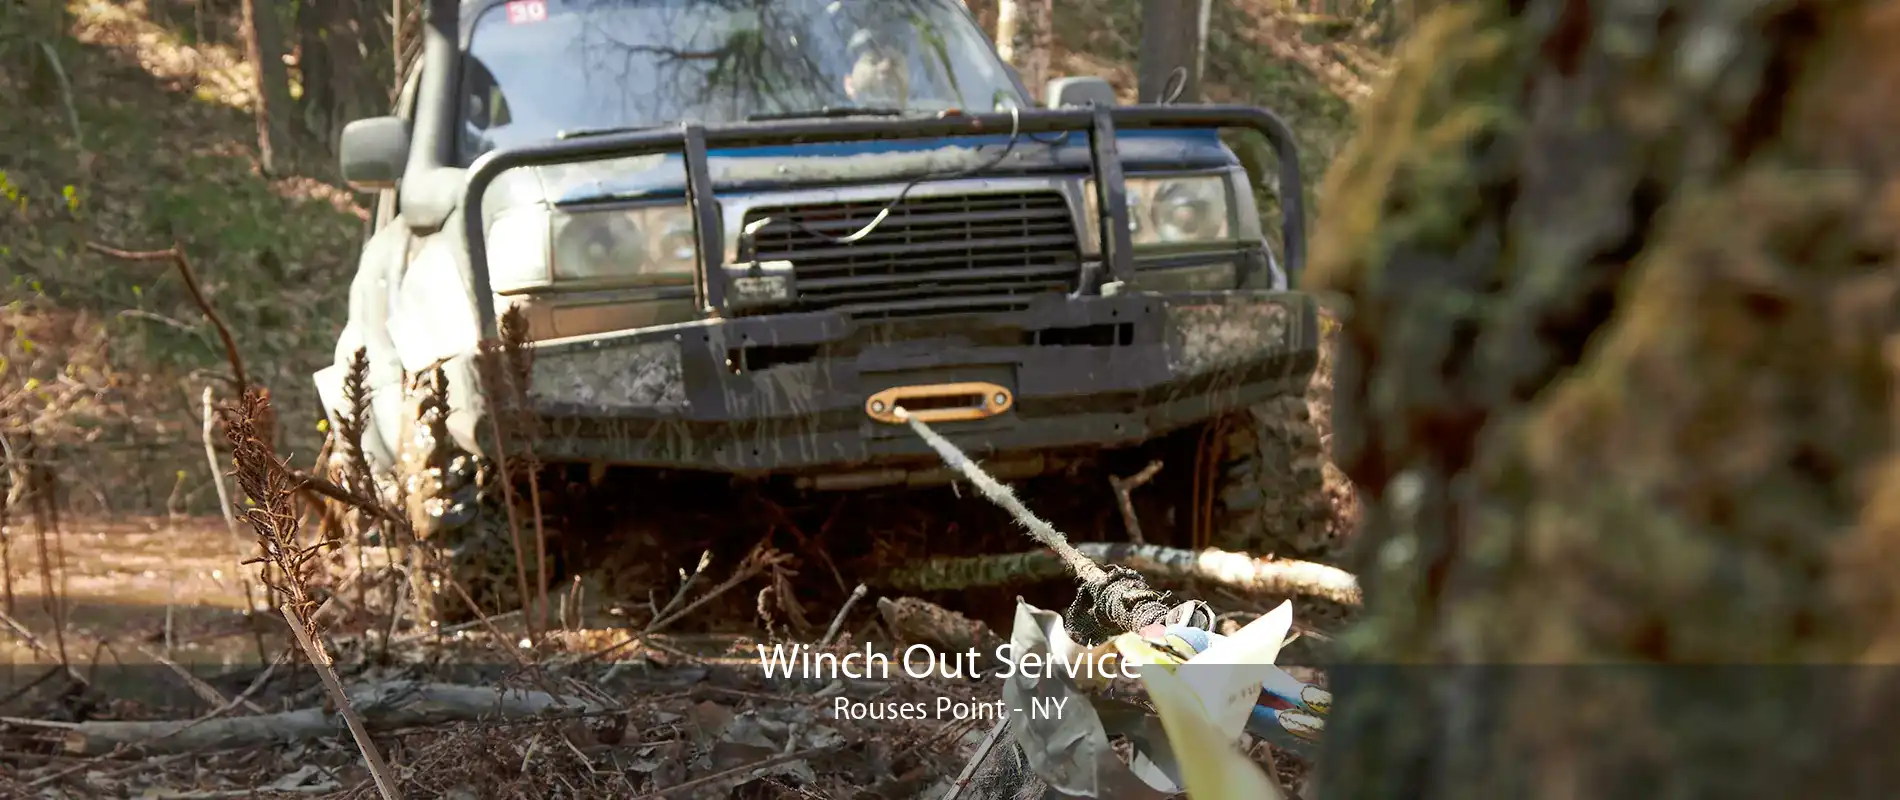 Winch Out Service Rouses Point - NY